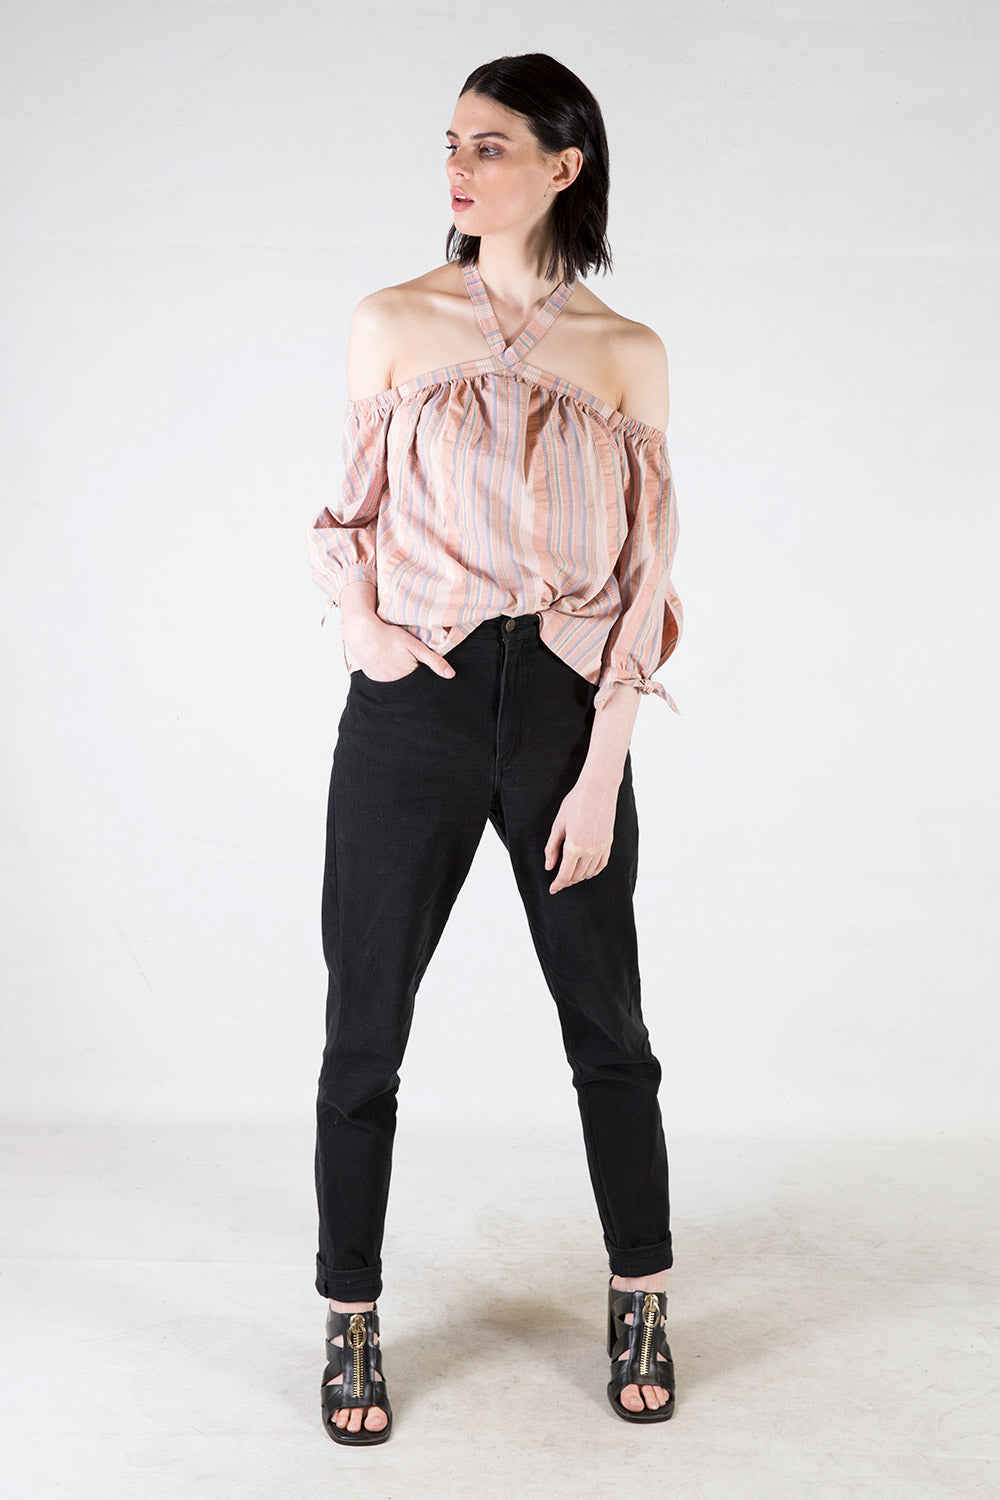 George Off The Shoulder Top | Young + Resolute | Annah Stretton